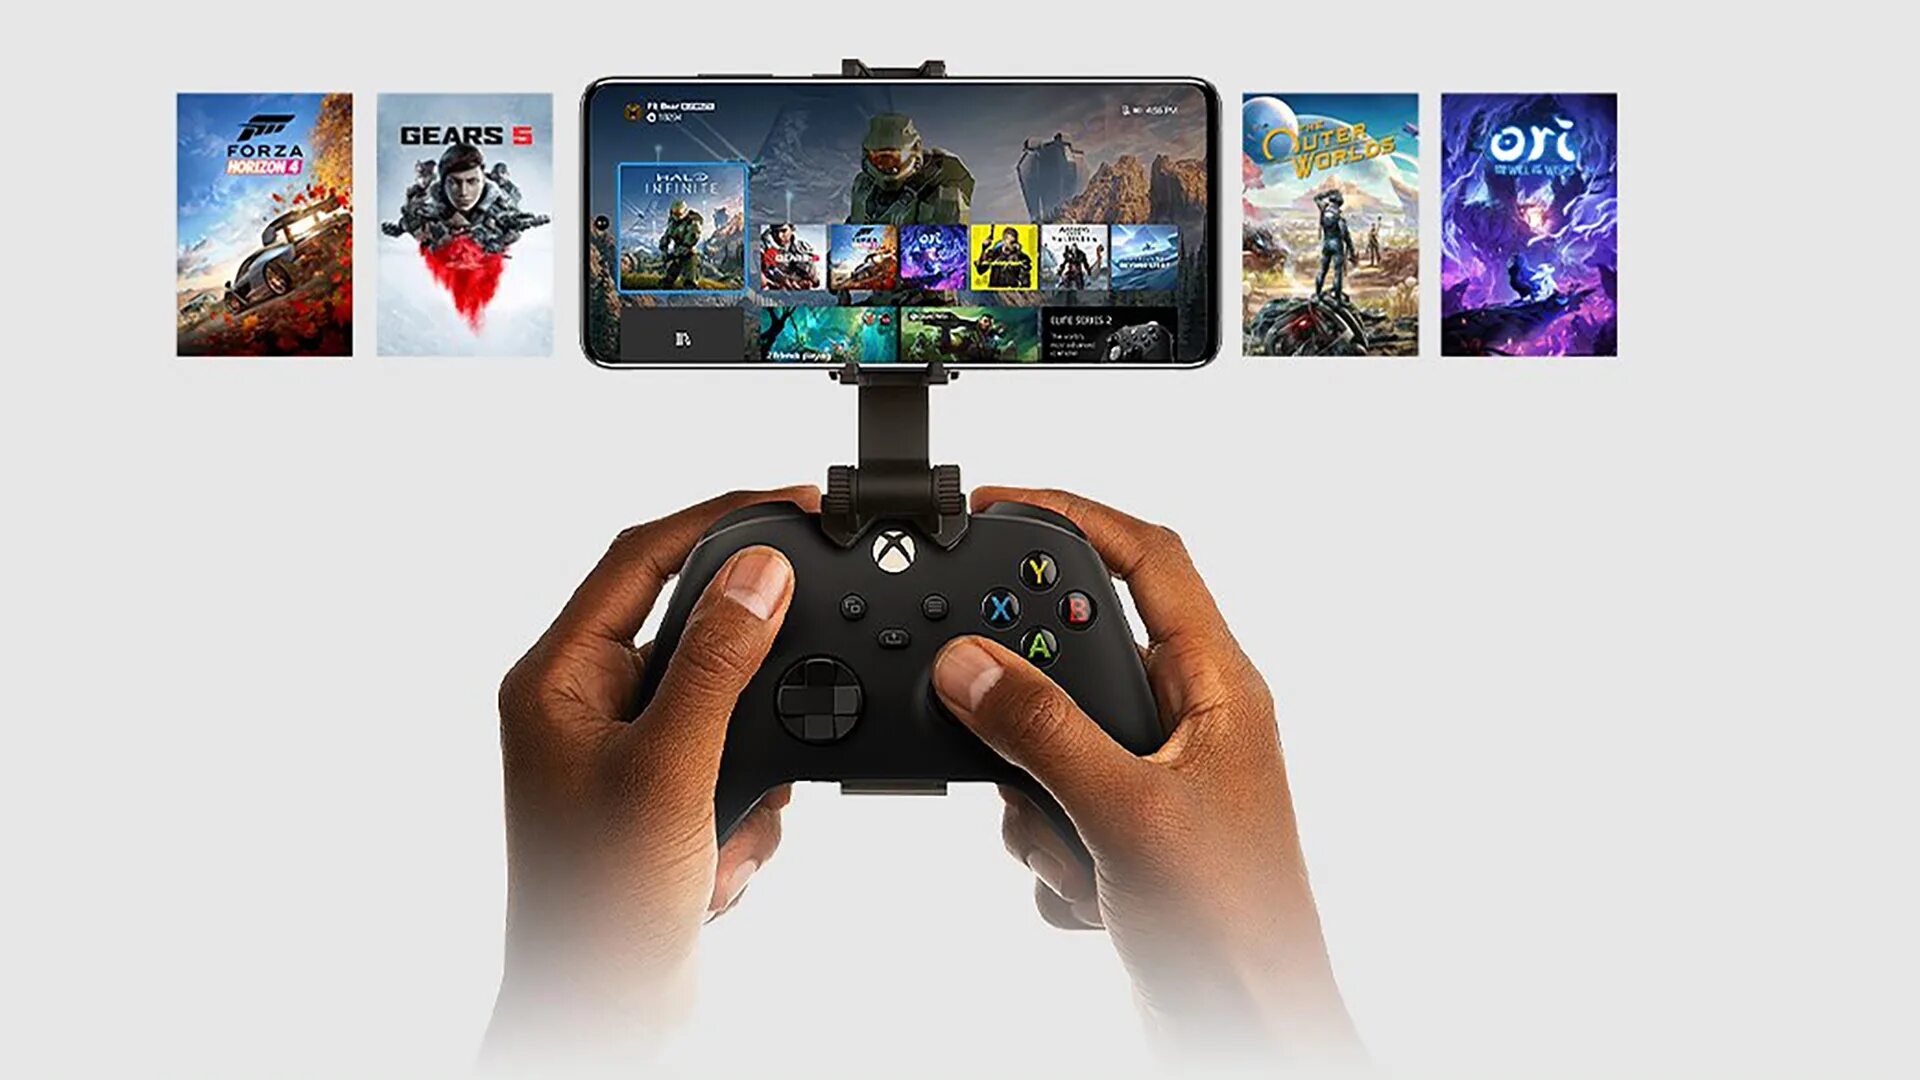 Xbox 360 Remote Play. Xbox game streaming. Xbox приложение. Приложение Xbox на андроид. Xbox game android